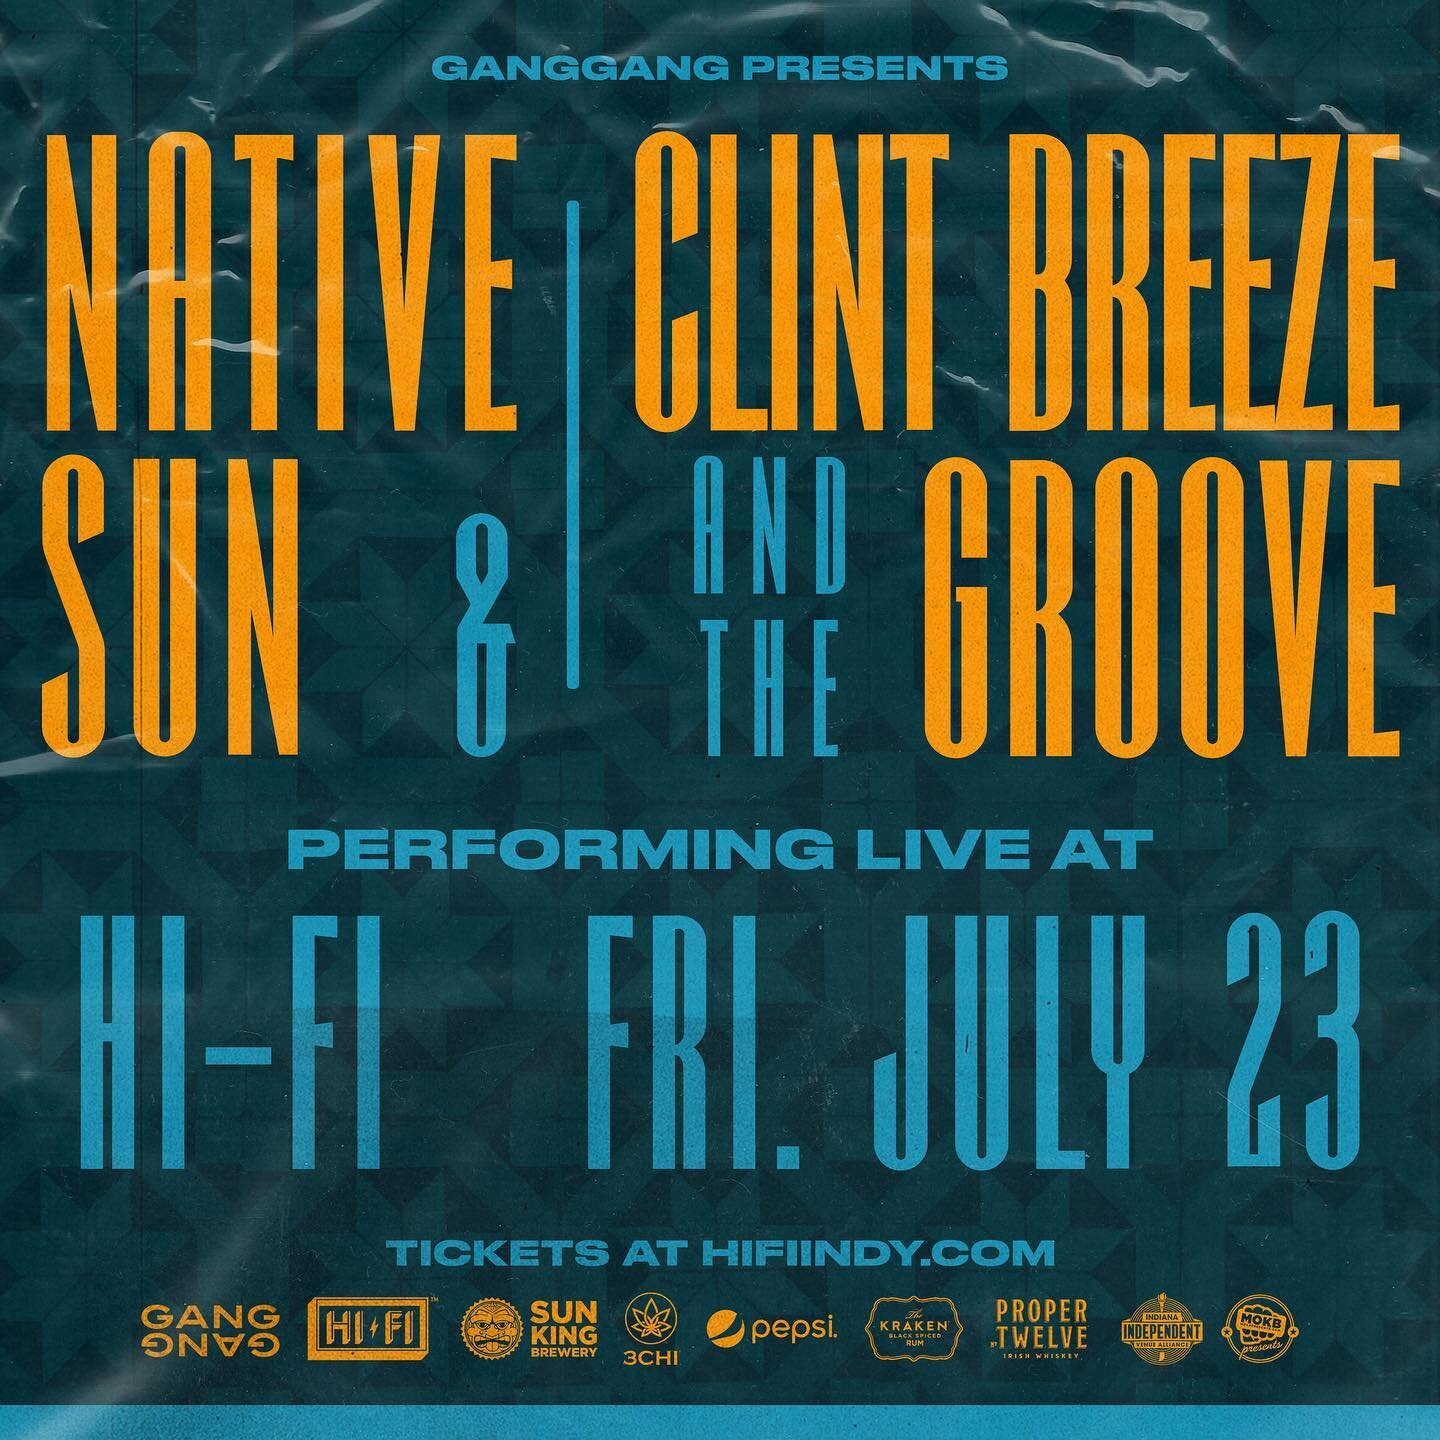 Gearing up for a special show with our brothers @nativesunlive 🔥

Have you gotten your tickets? Now is the perfect time if not. It&rsquo;s going down at @thehifiindy and you don&rsquo;t want to miss! 

Let&rsquo;s go 🙌🏿

#clintbreezeandthegroove #